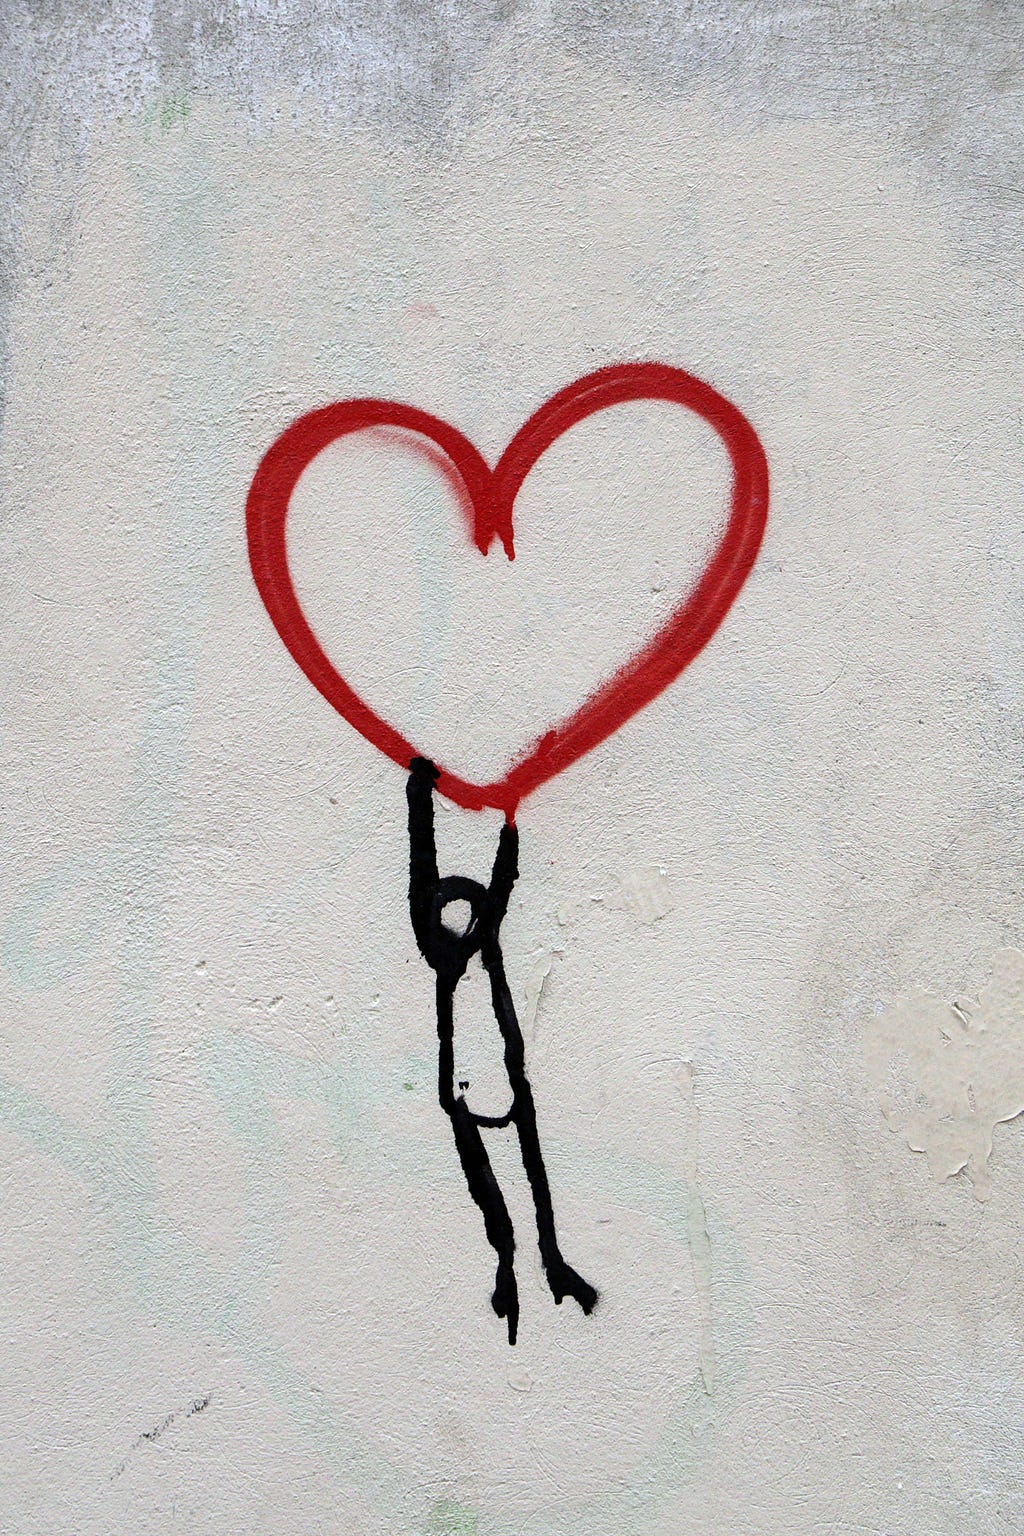 A drawing of a person hanging onto a hollow heart